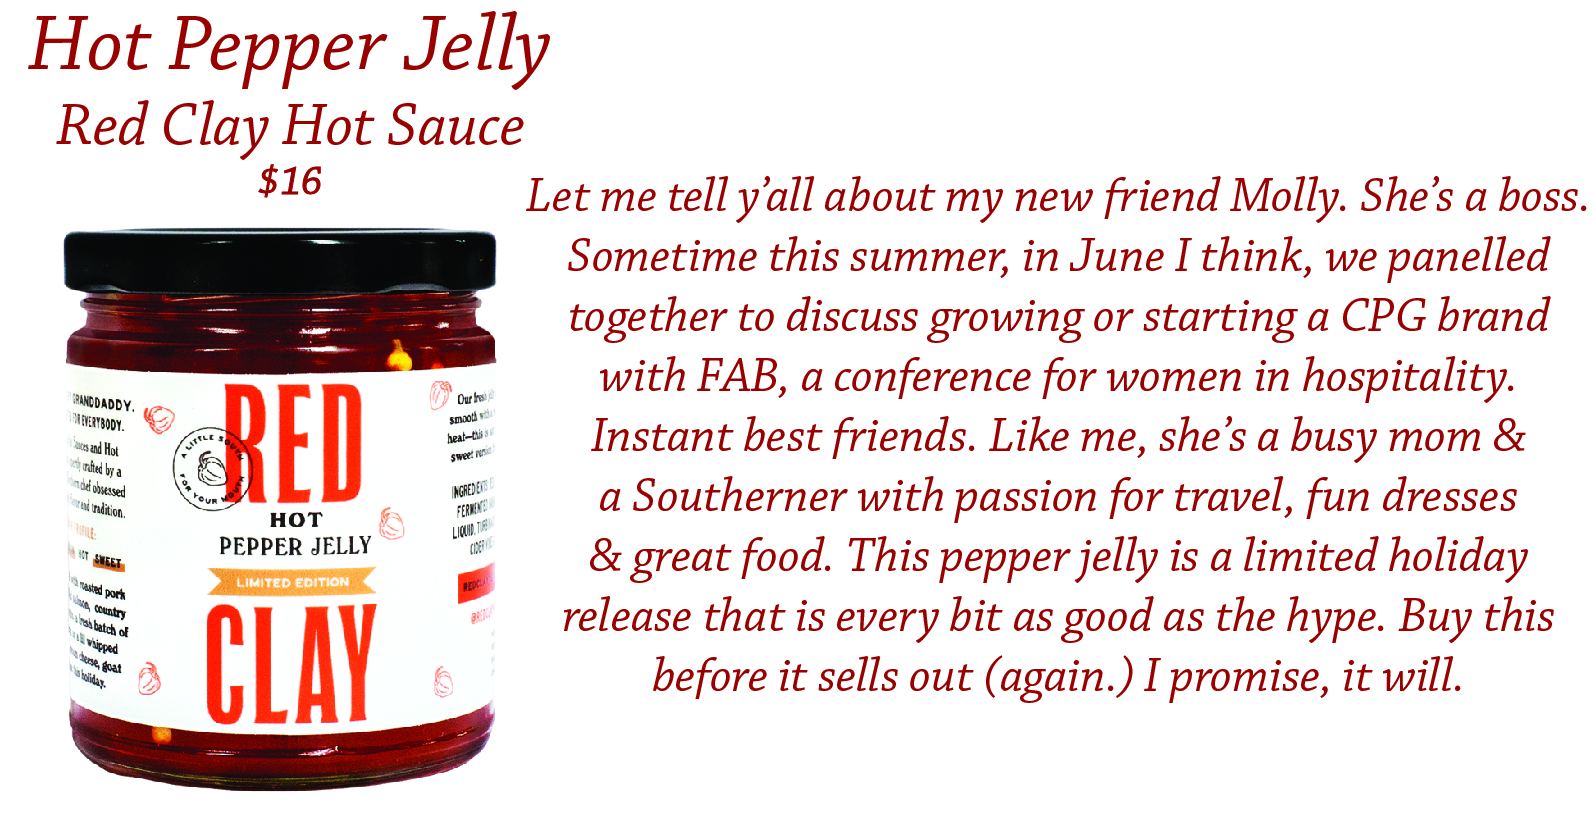 Red Clay Hot Pepper Jelly